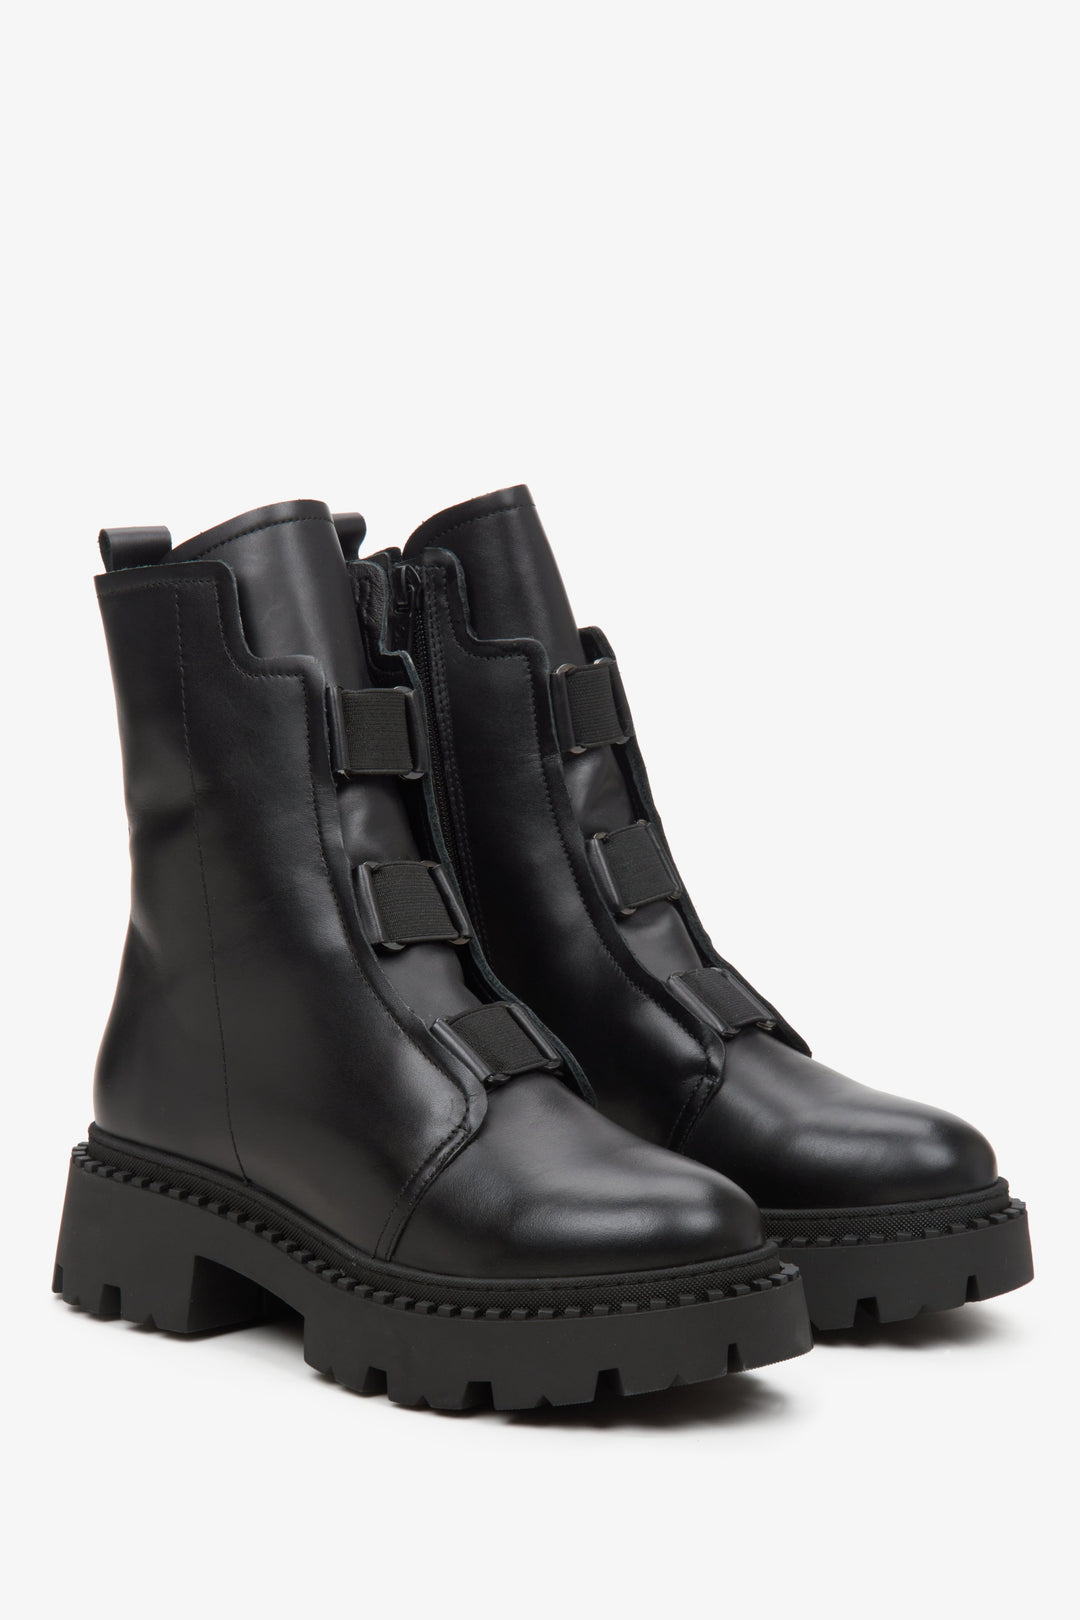 Estro black women's leather ankle boots - perfect for fall.